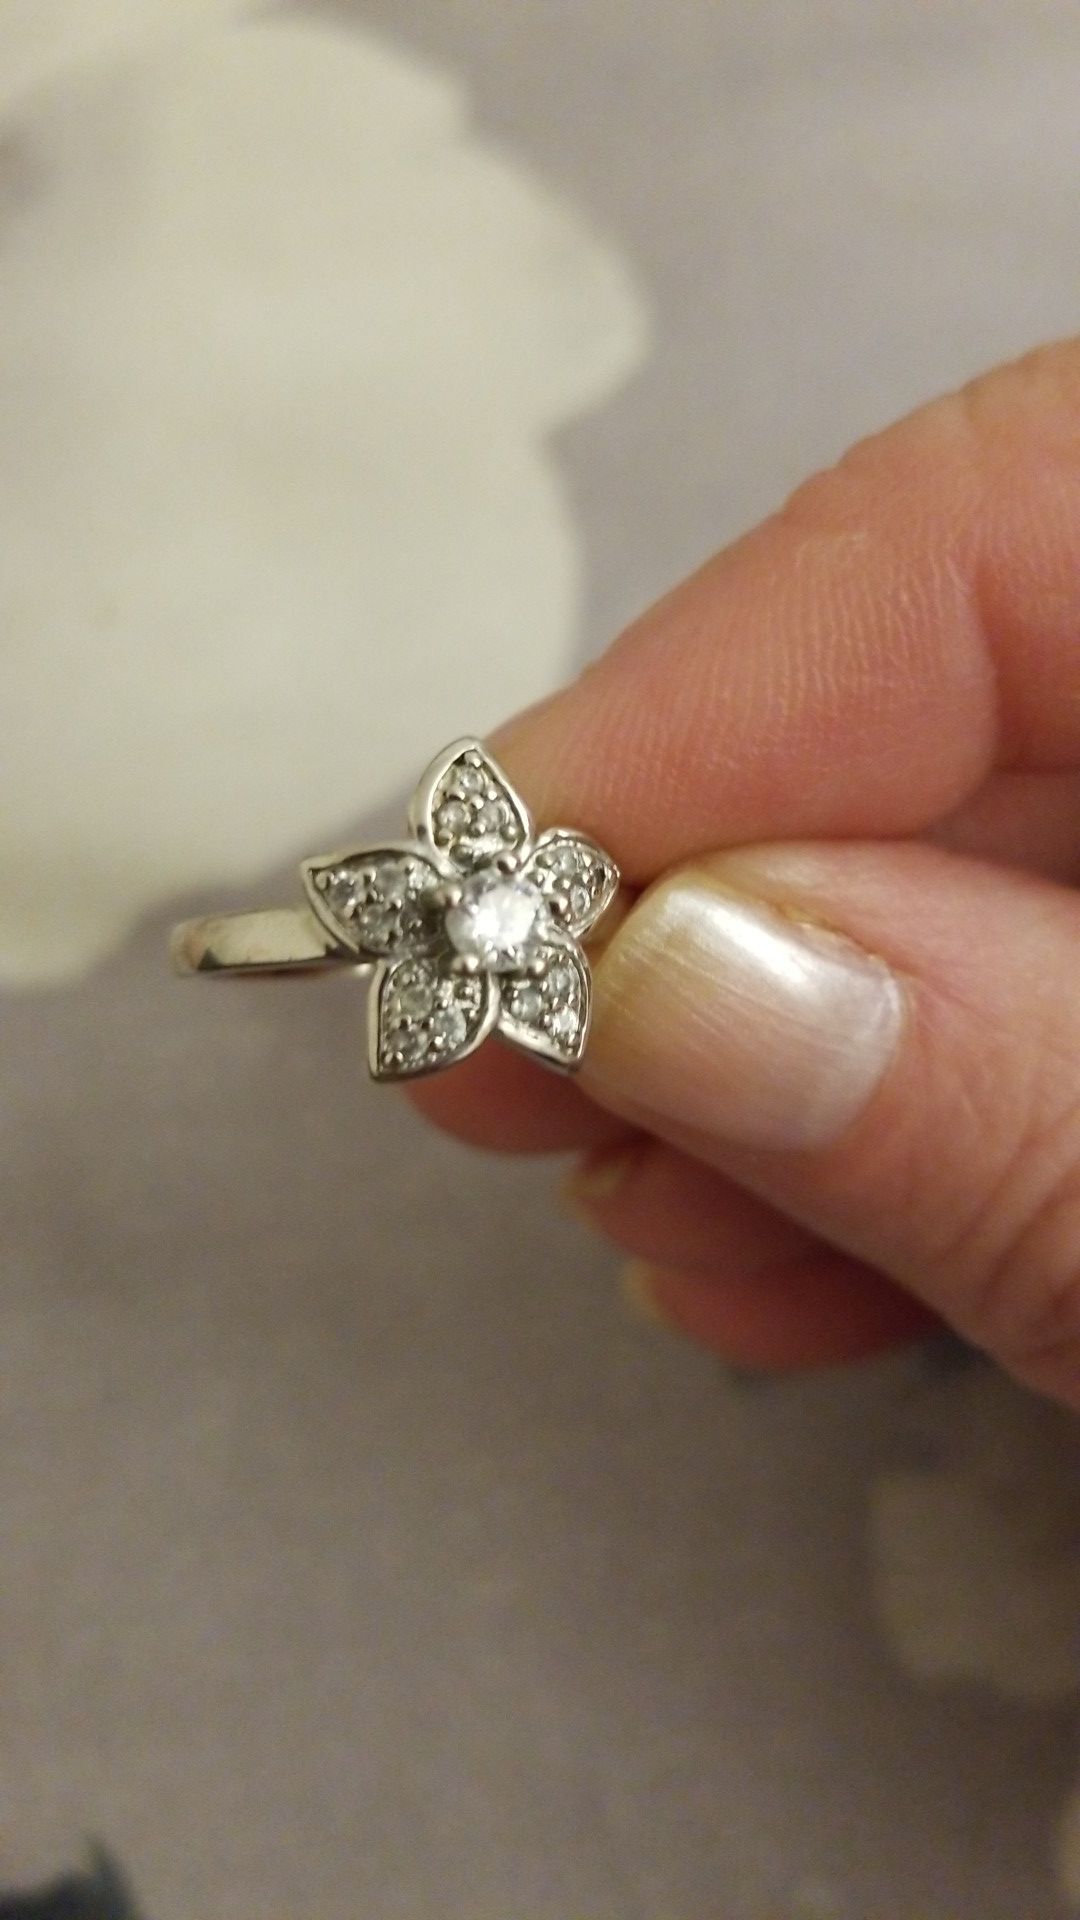 Ladies flower sterling silver ring 925, New $8plus shipping.